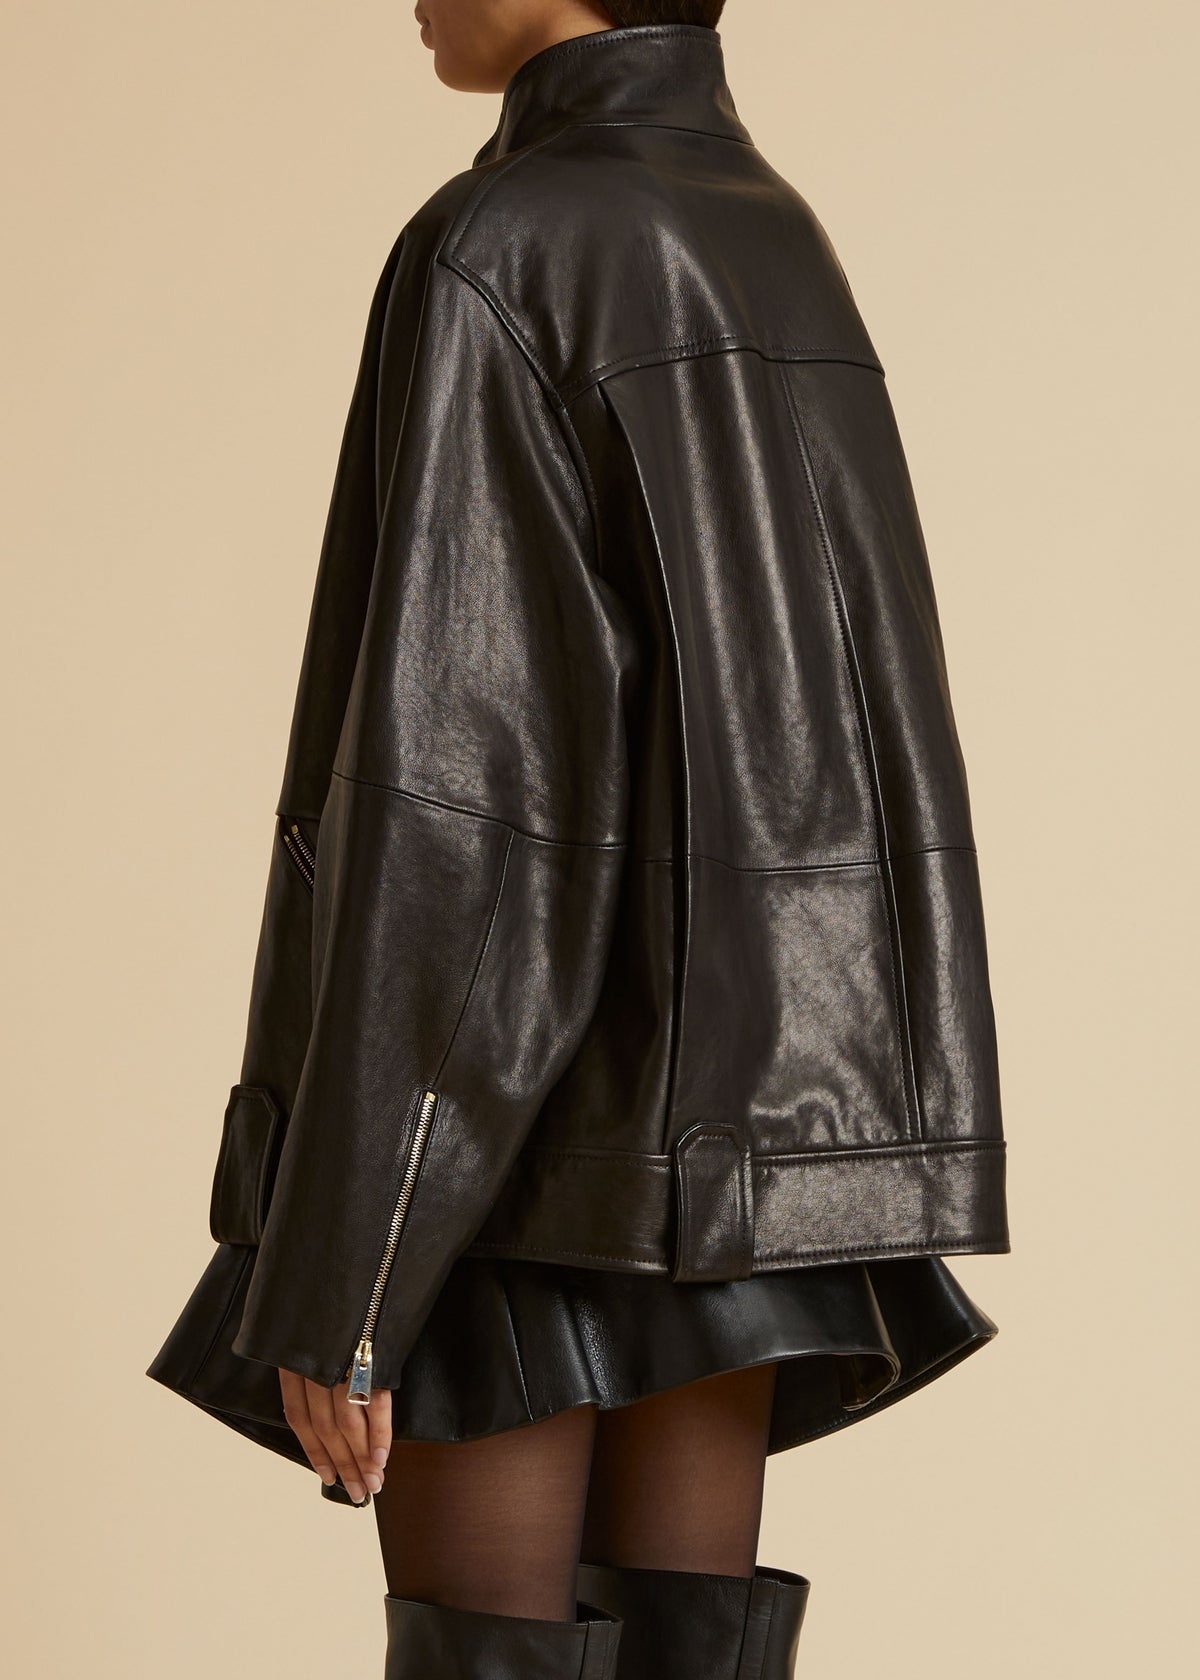 The Shallin Jacket in Black Leather - 3